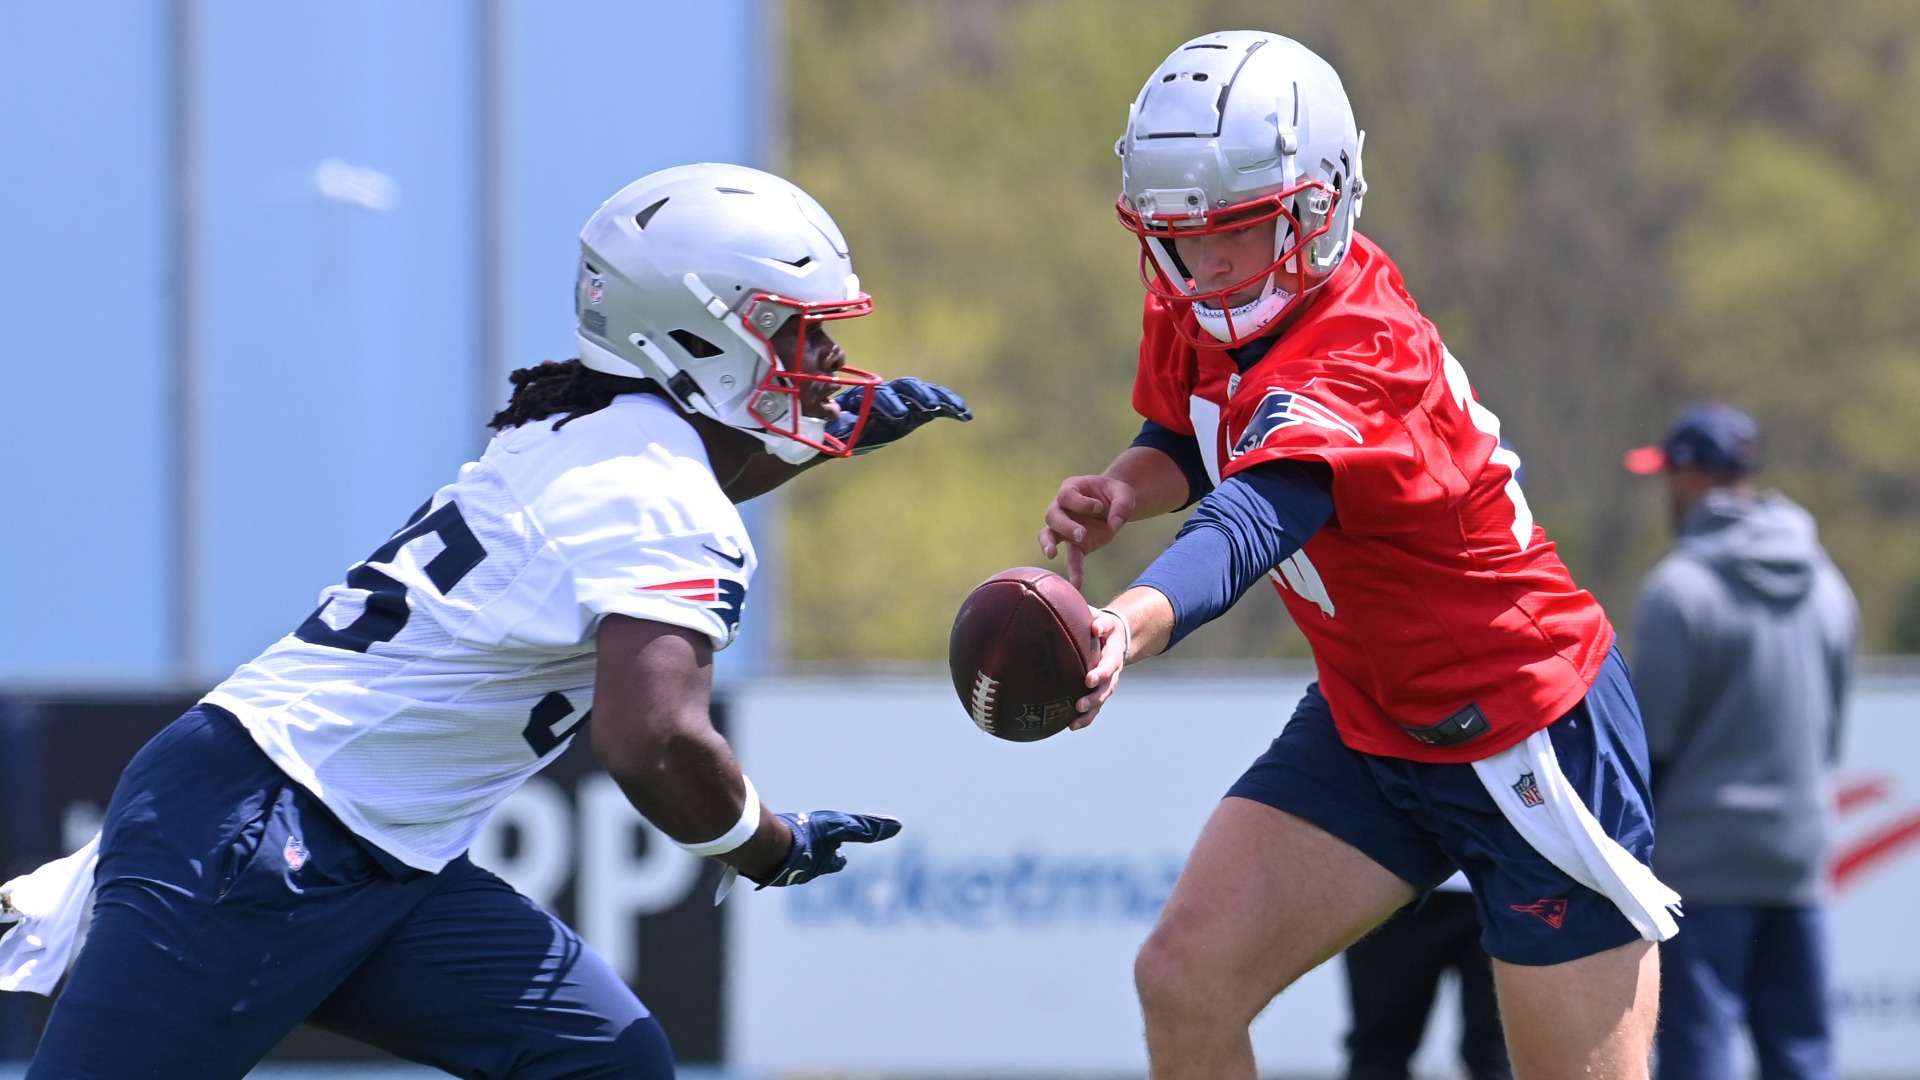 Patriots Takeaways: What Stood Out On Day 1 Of OTAs